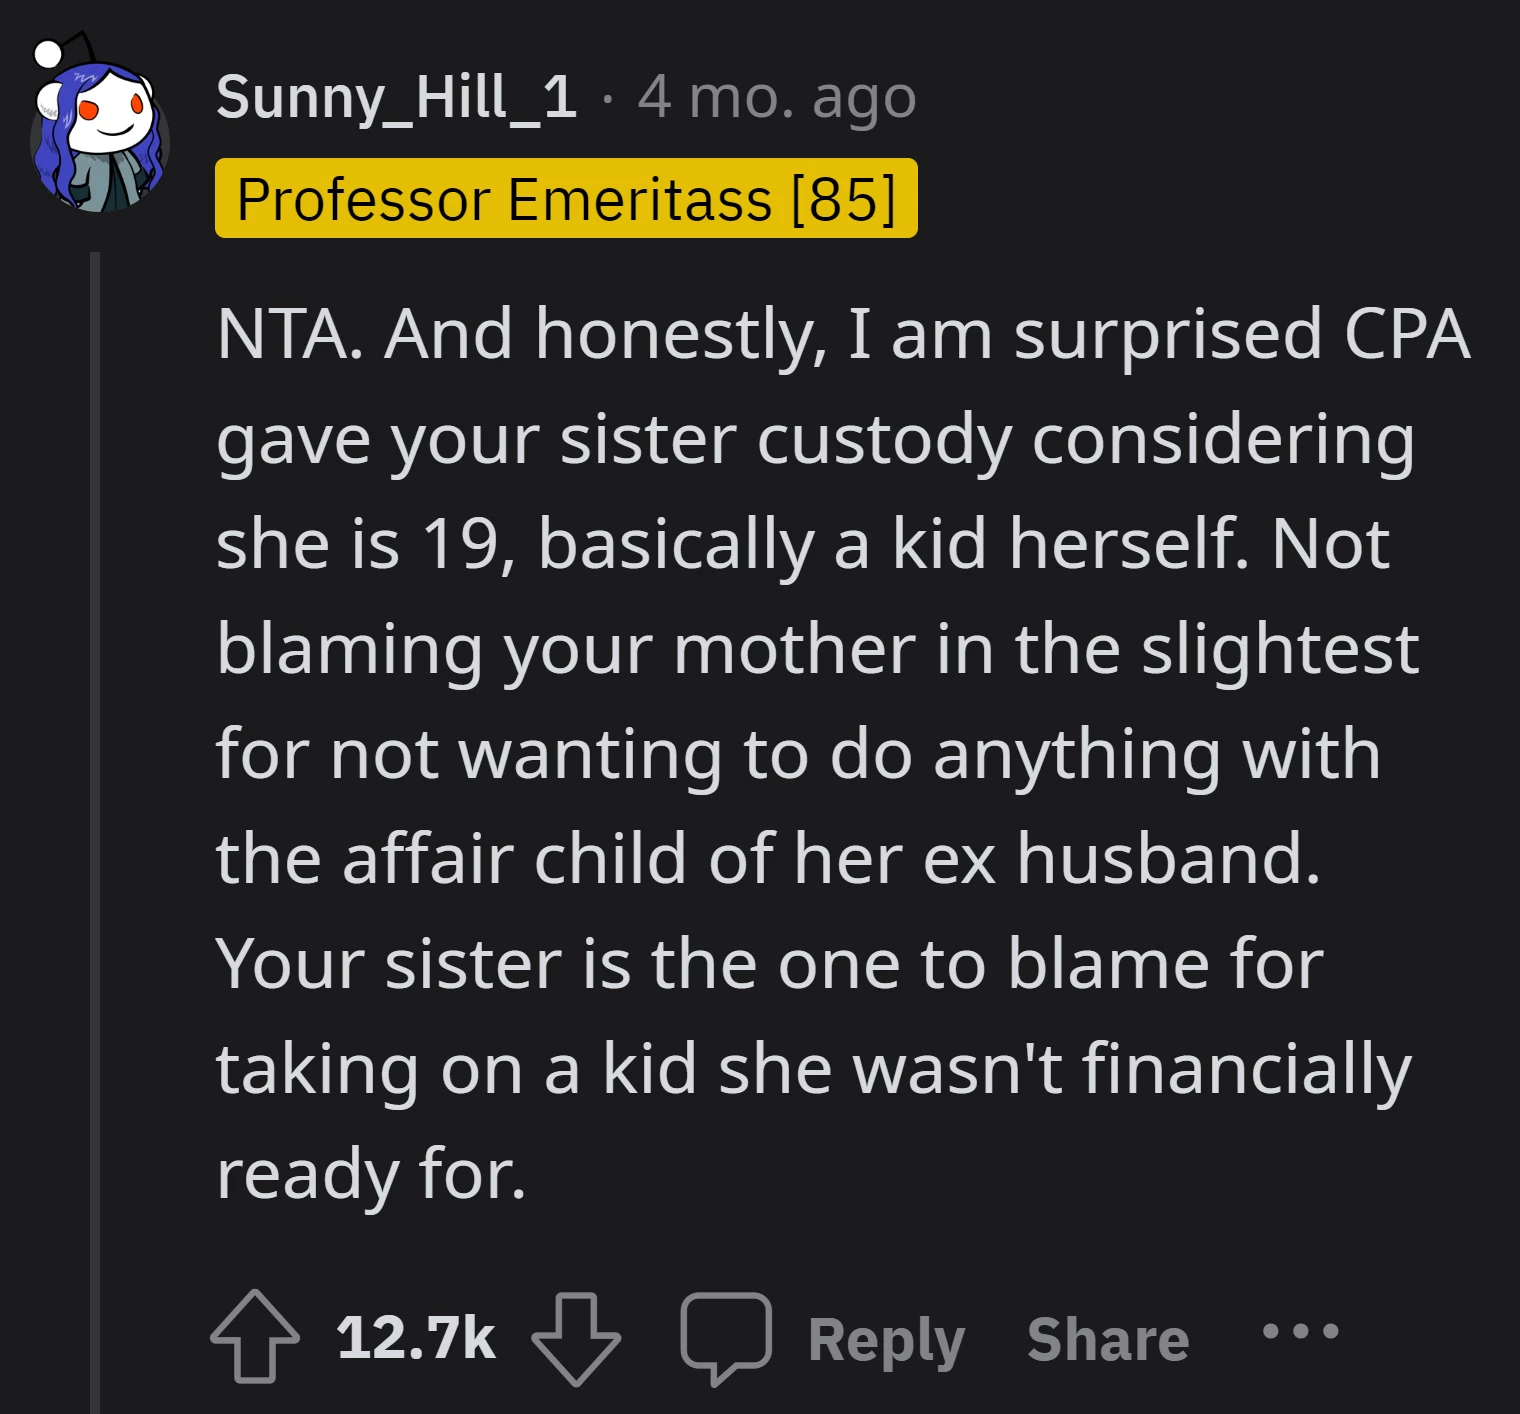 The person says it's not the mom's fault for not wanting to take care of her ex-husband's affair child,